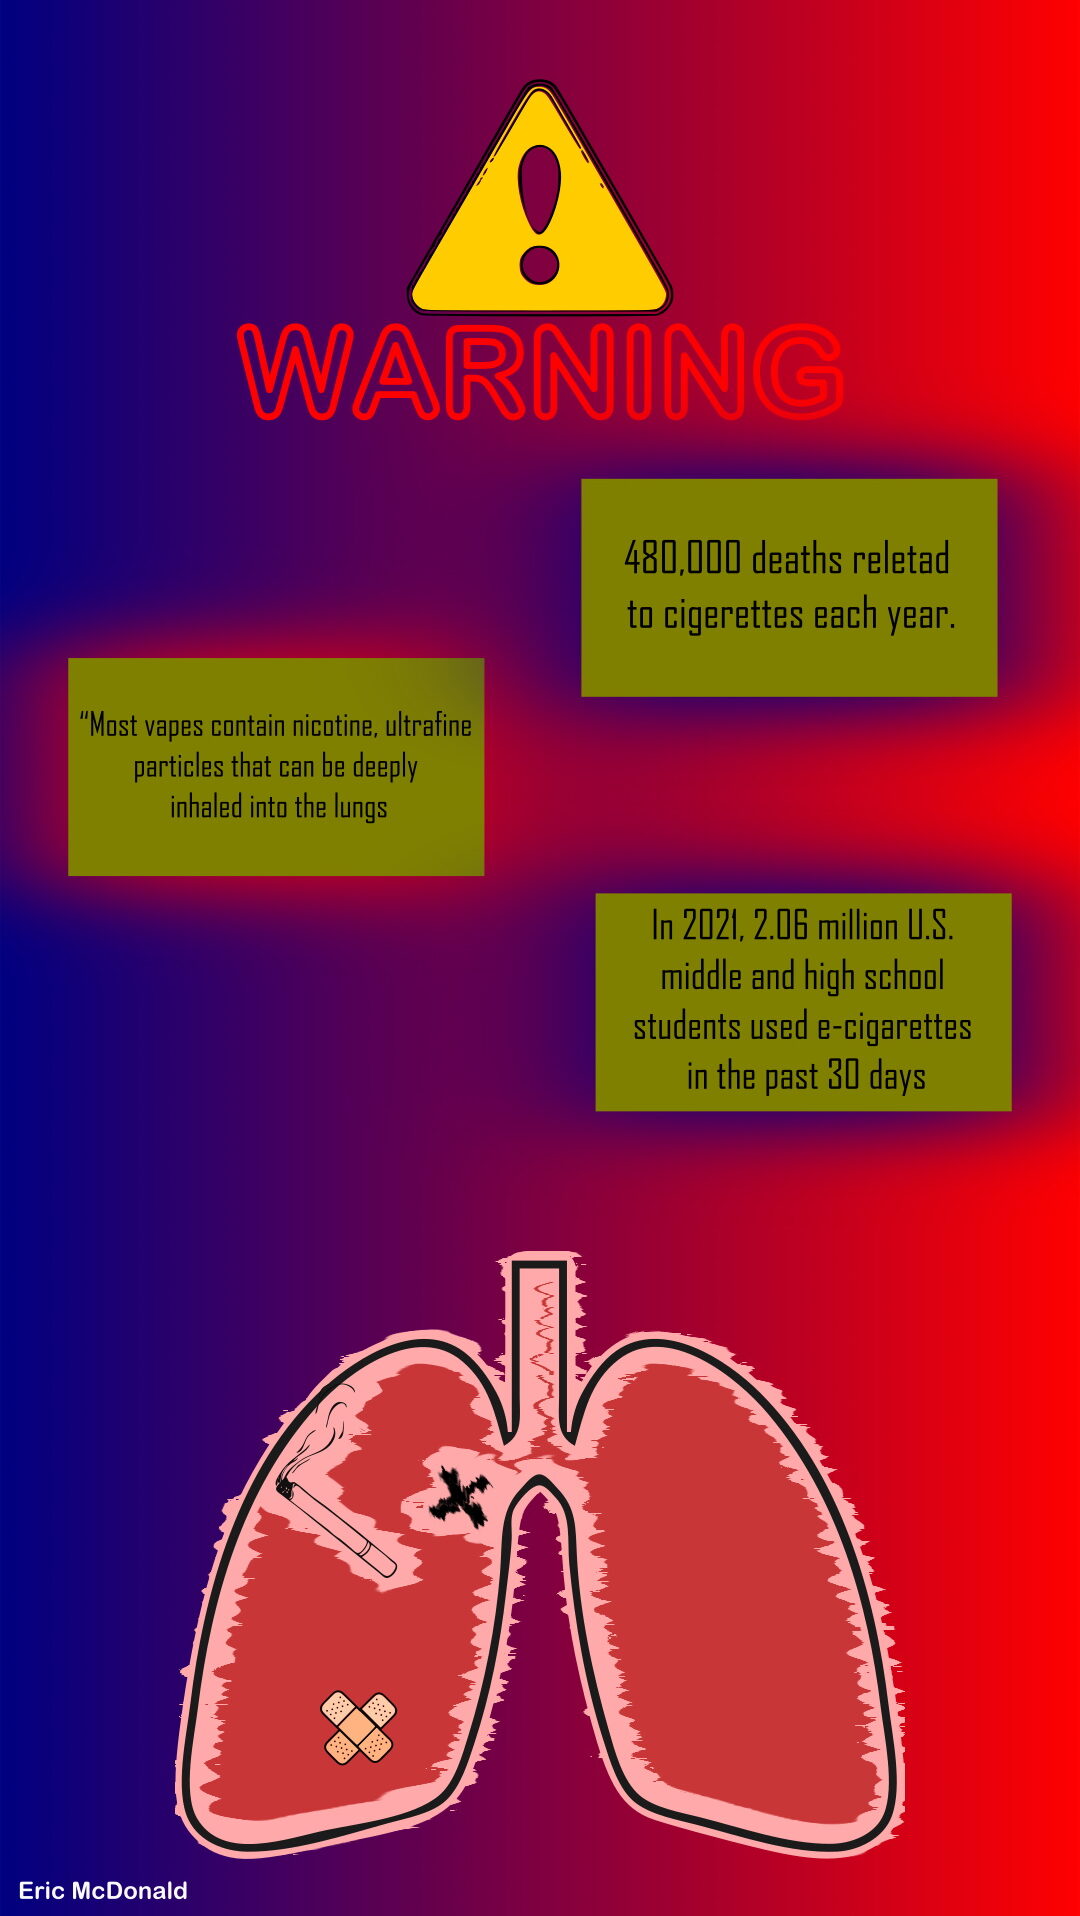 Warning

480,000 deaths related to cigerettes each year.

"most vapes contain nicotine. ultrafine particles that can be deeply inhaled into the lungs."

in 2021, 2.06 million U.S middle and highschool students used e-cigerettes in the past 30 days.